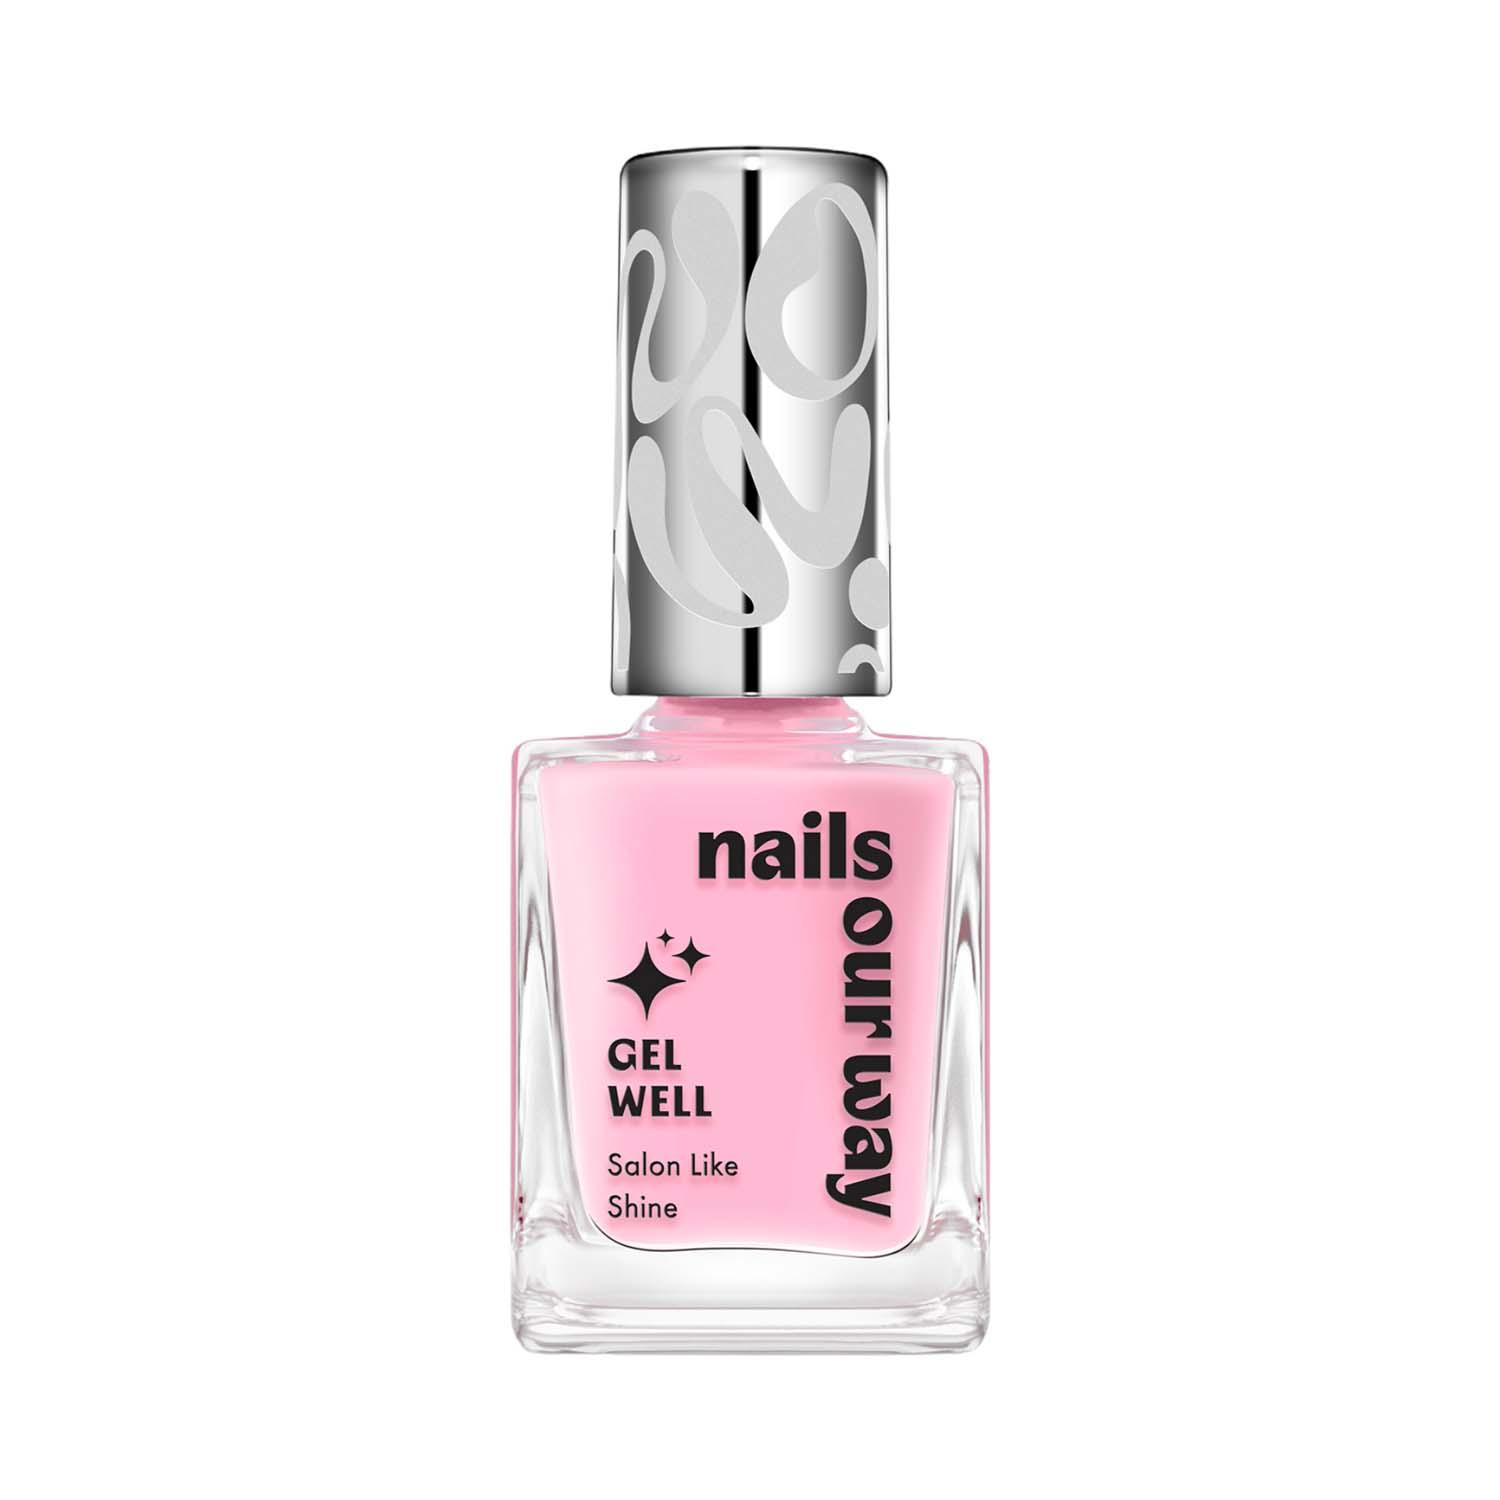 Nails Our Way Gel Well Nail Enamel - 202 Alluring (10 ml)